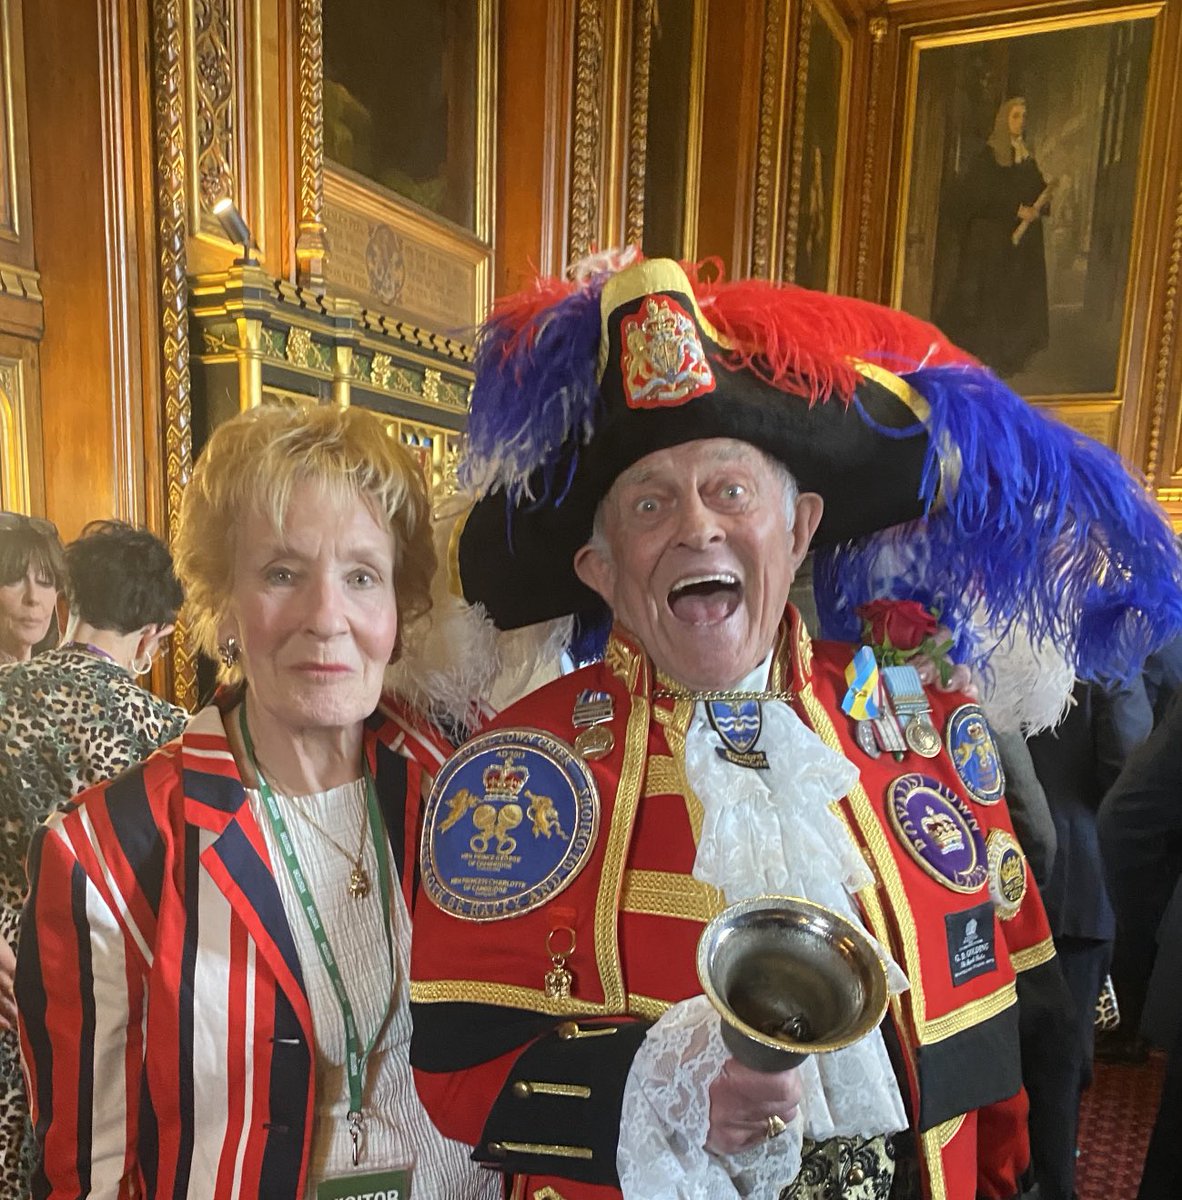 Happily reunited with magnificent #RomfordTownCrier in the equally magnificent surroundings of #SpeakersHouse #StGeorge’sDay reception.